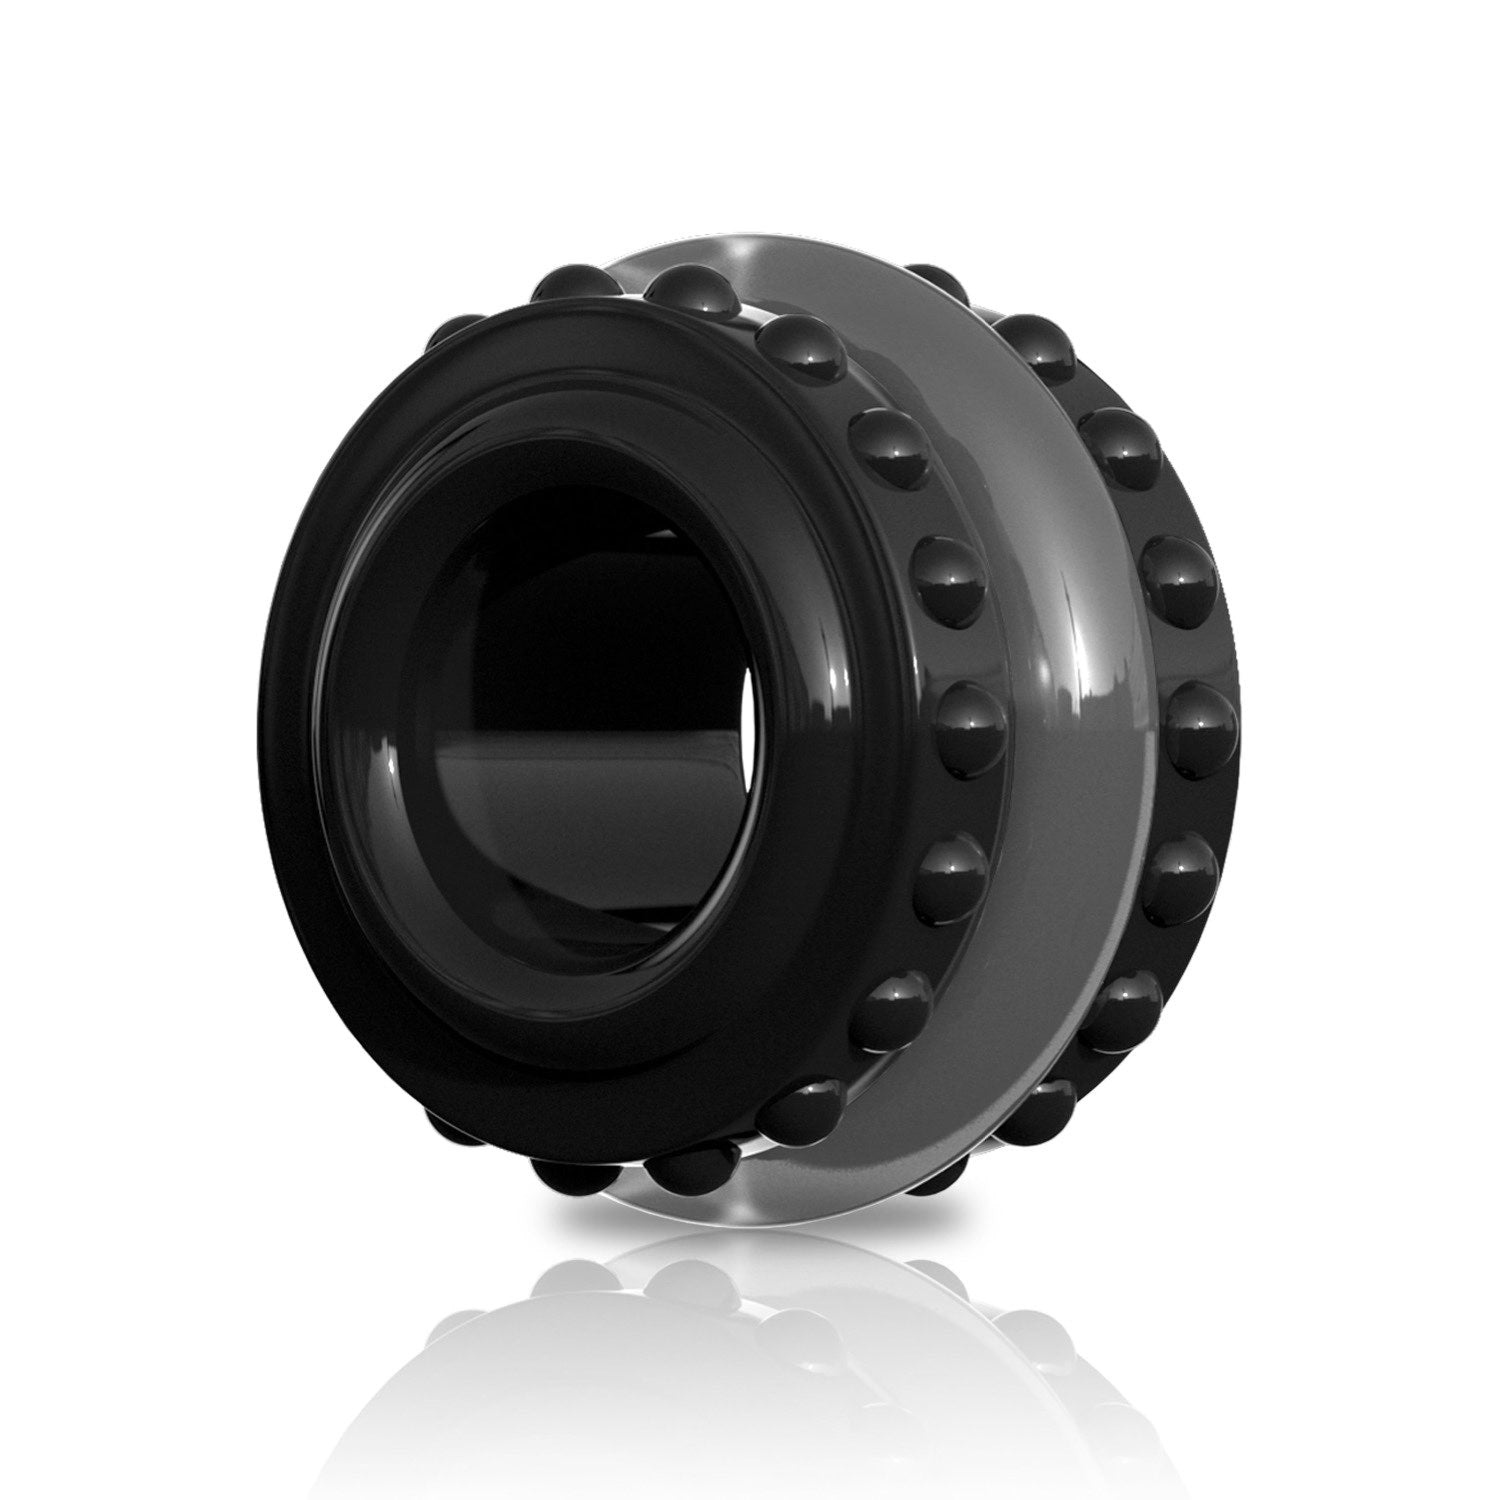 Sir Richards Pro Performance Advanced C-Ring - Black/Clear Cock Ring by Pipedream